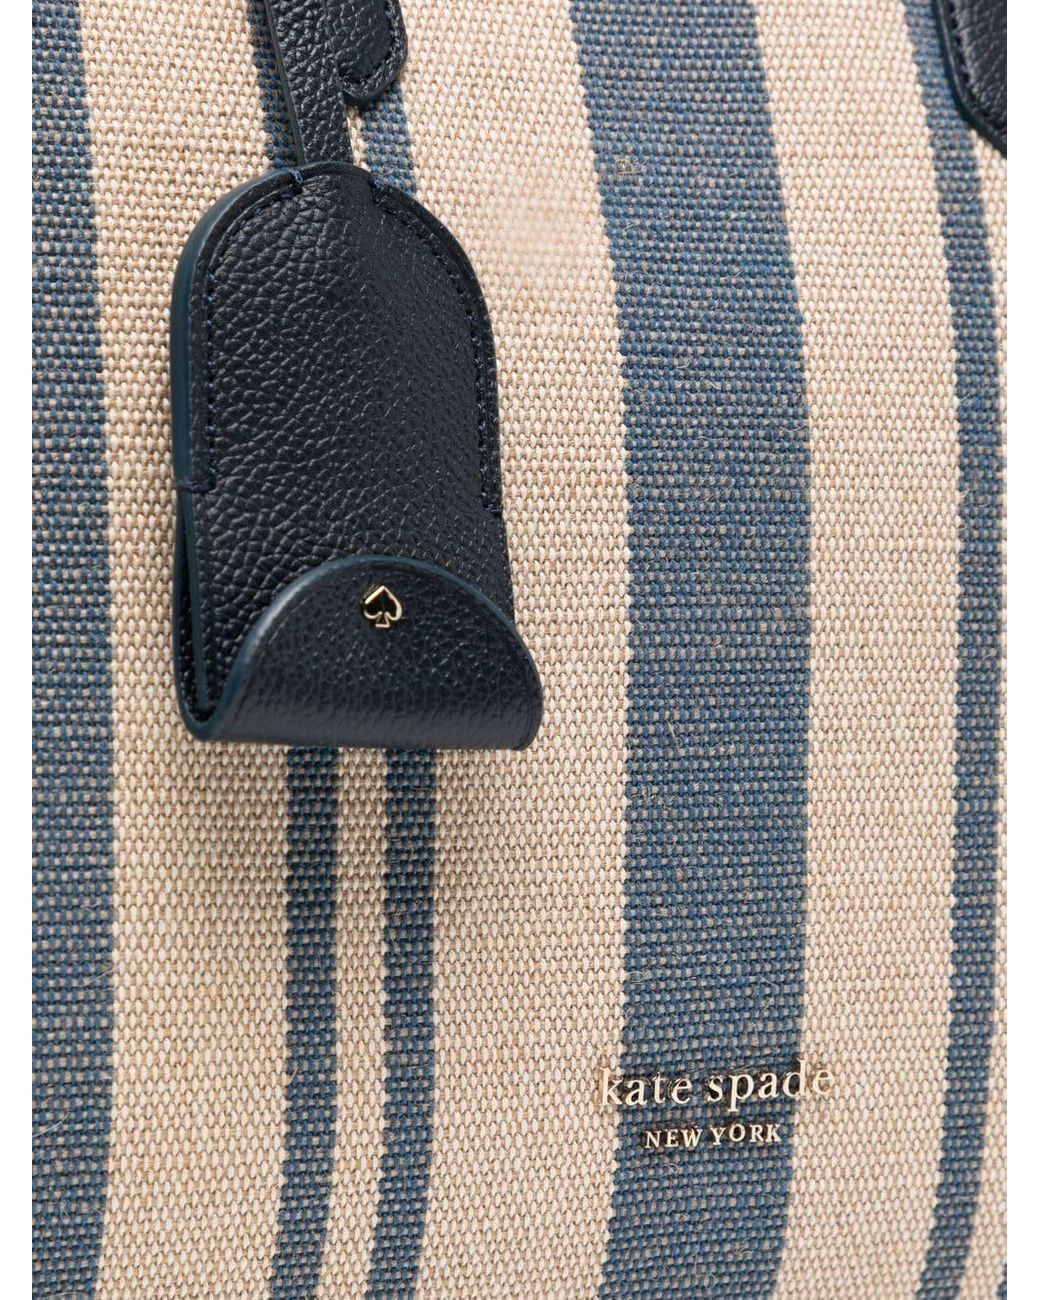 Kate Spade New York Cute Lunch Bag for Women, Large Capacity Lunch Tote,  Adult Lunch Box with Silver Thermal Insulated Interior Lining and Storage  Pocket, Candy Stripe - Walmart.com